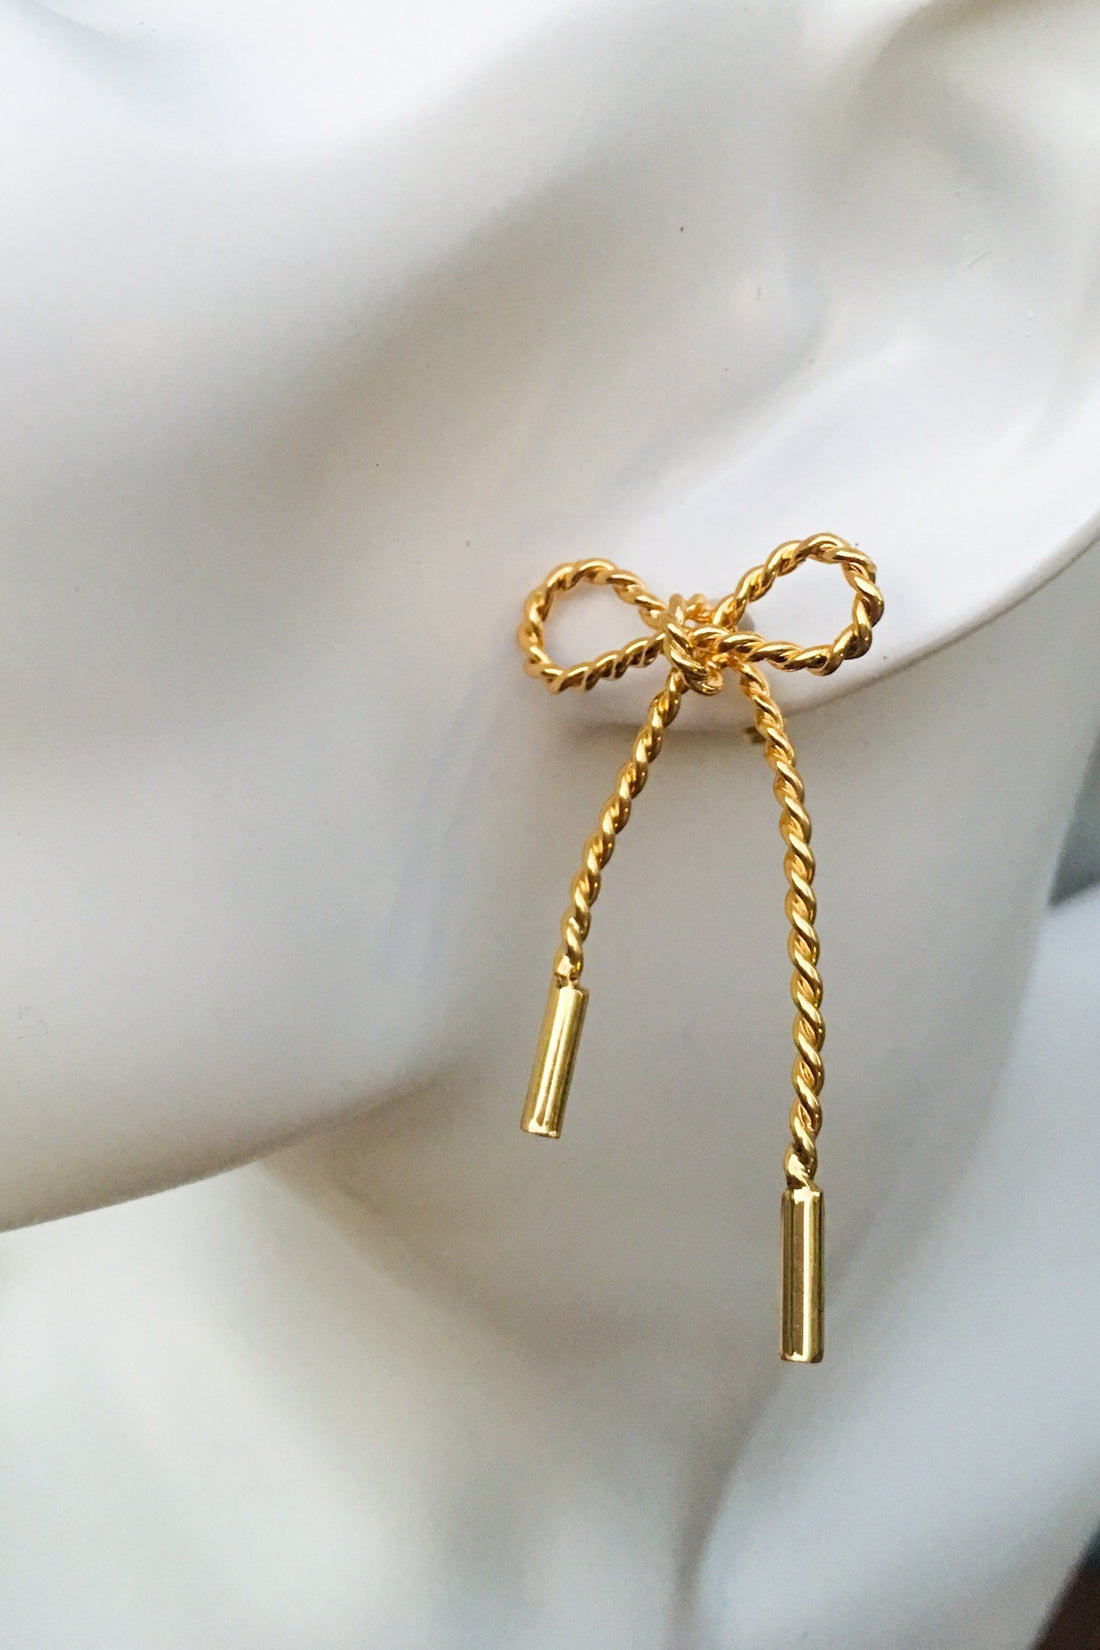 SKYE San Francisco SF California shop ethical sustainable modern minimalist quality women jewelry Luis 18K Gold Bow Earrings